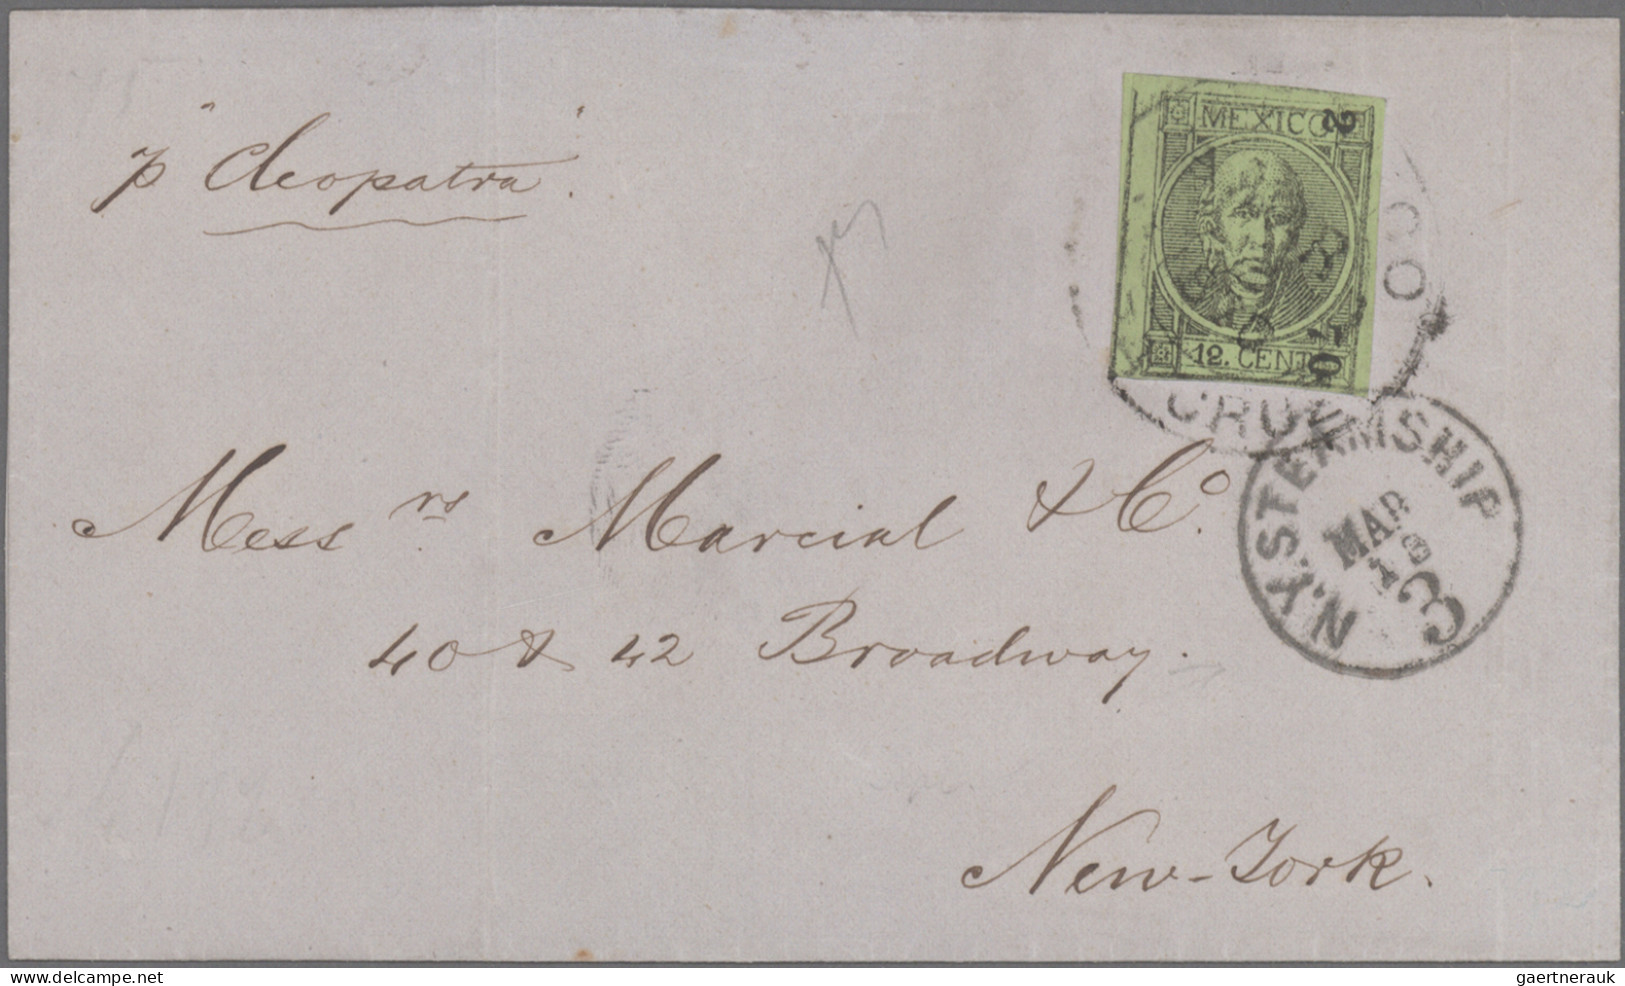 Mexico: 1858/1872, HIDALGO, collection of 26 letters (incl. one shortened letter